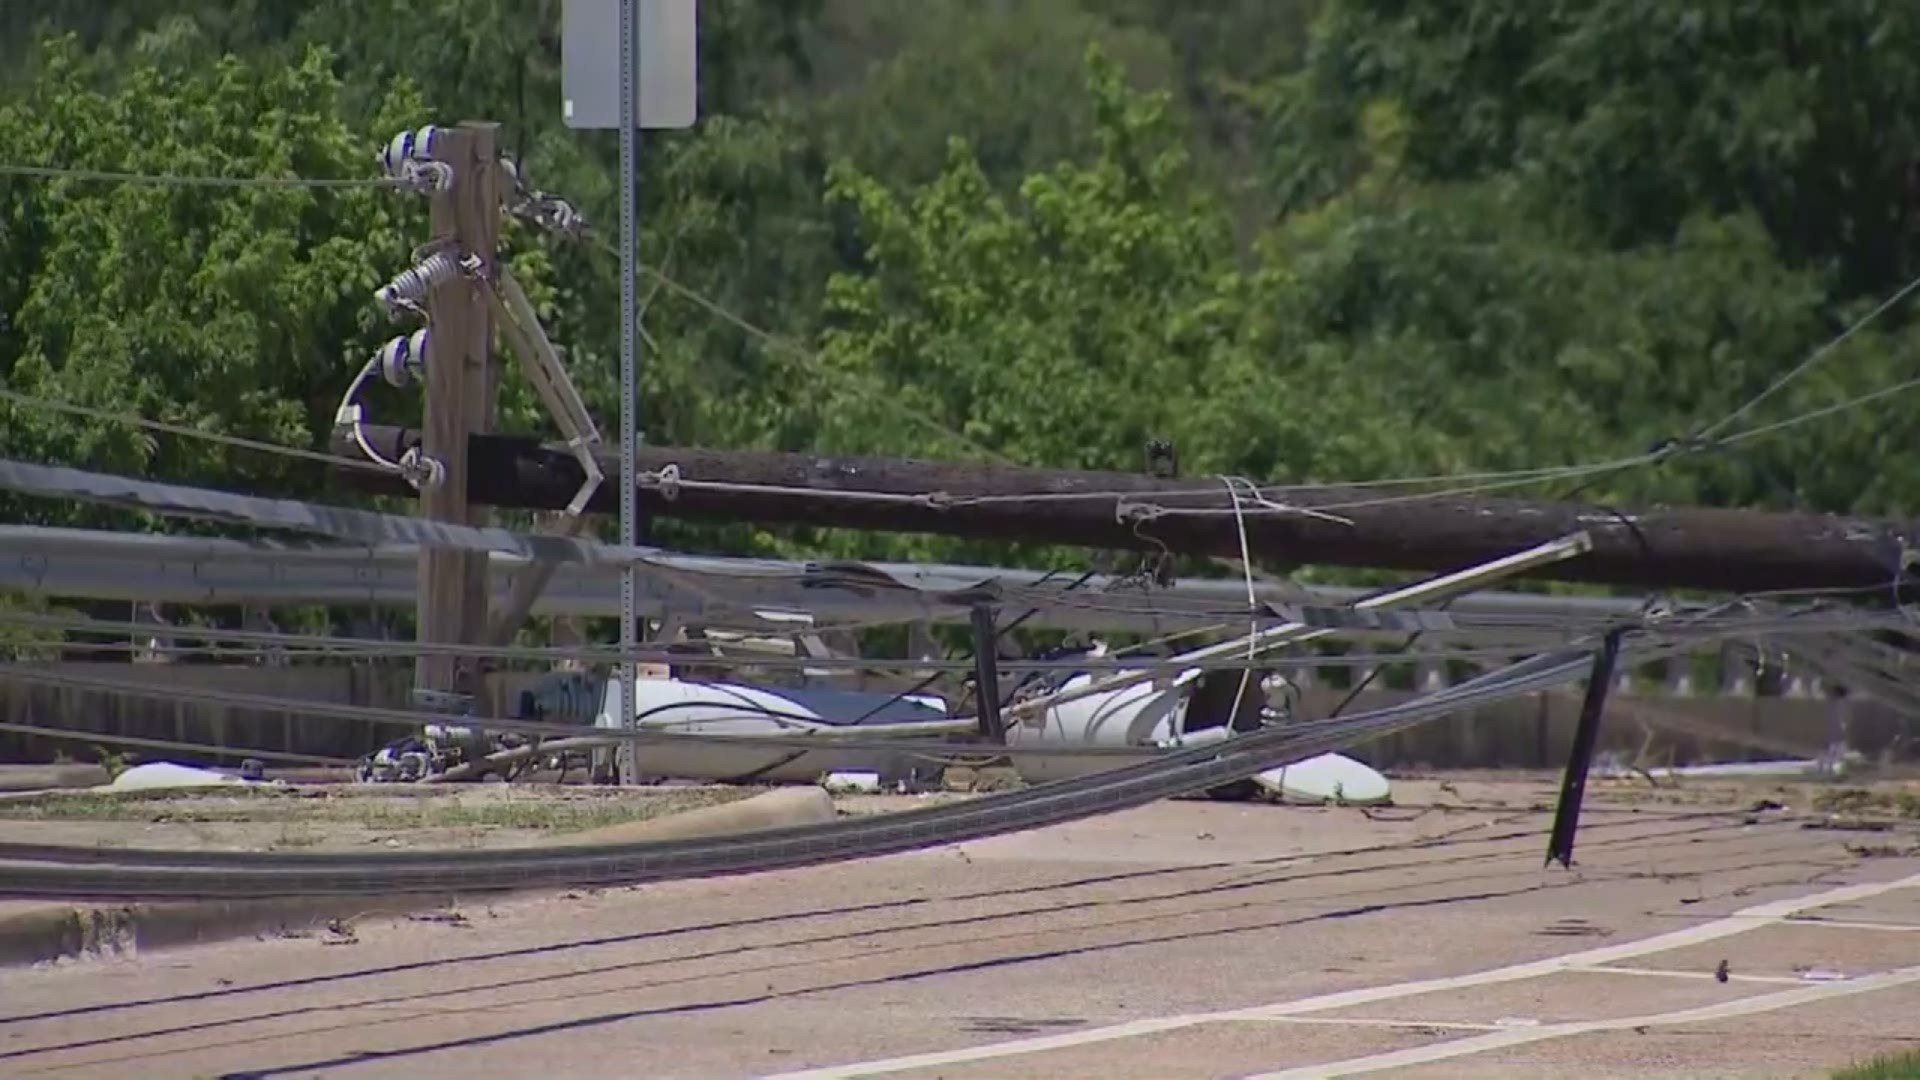 DFW Storms: Power outage problems could persist for several days